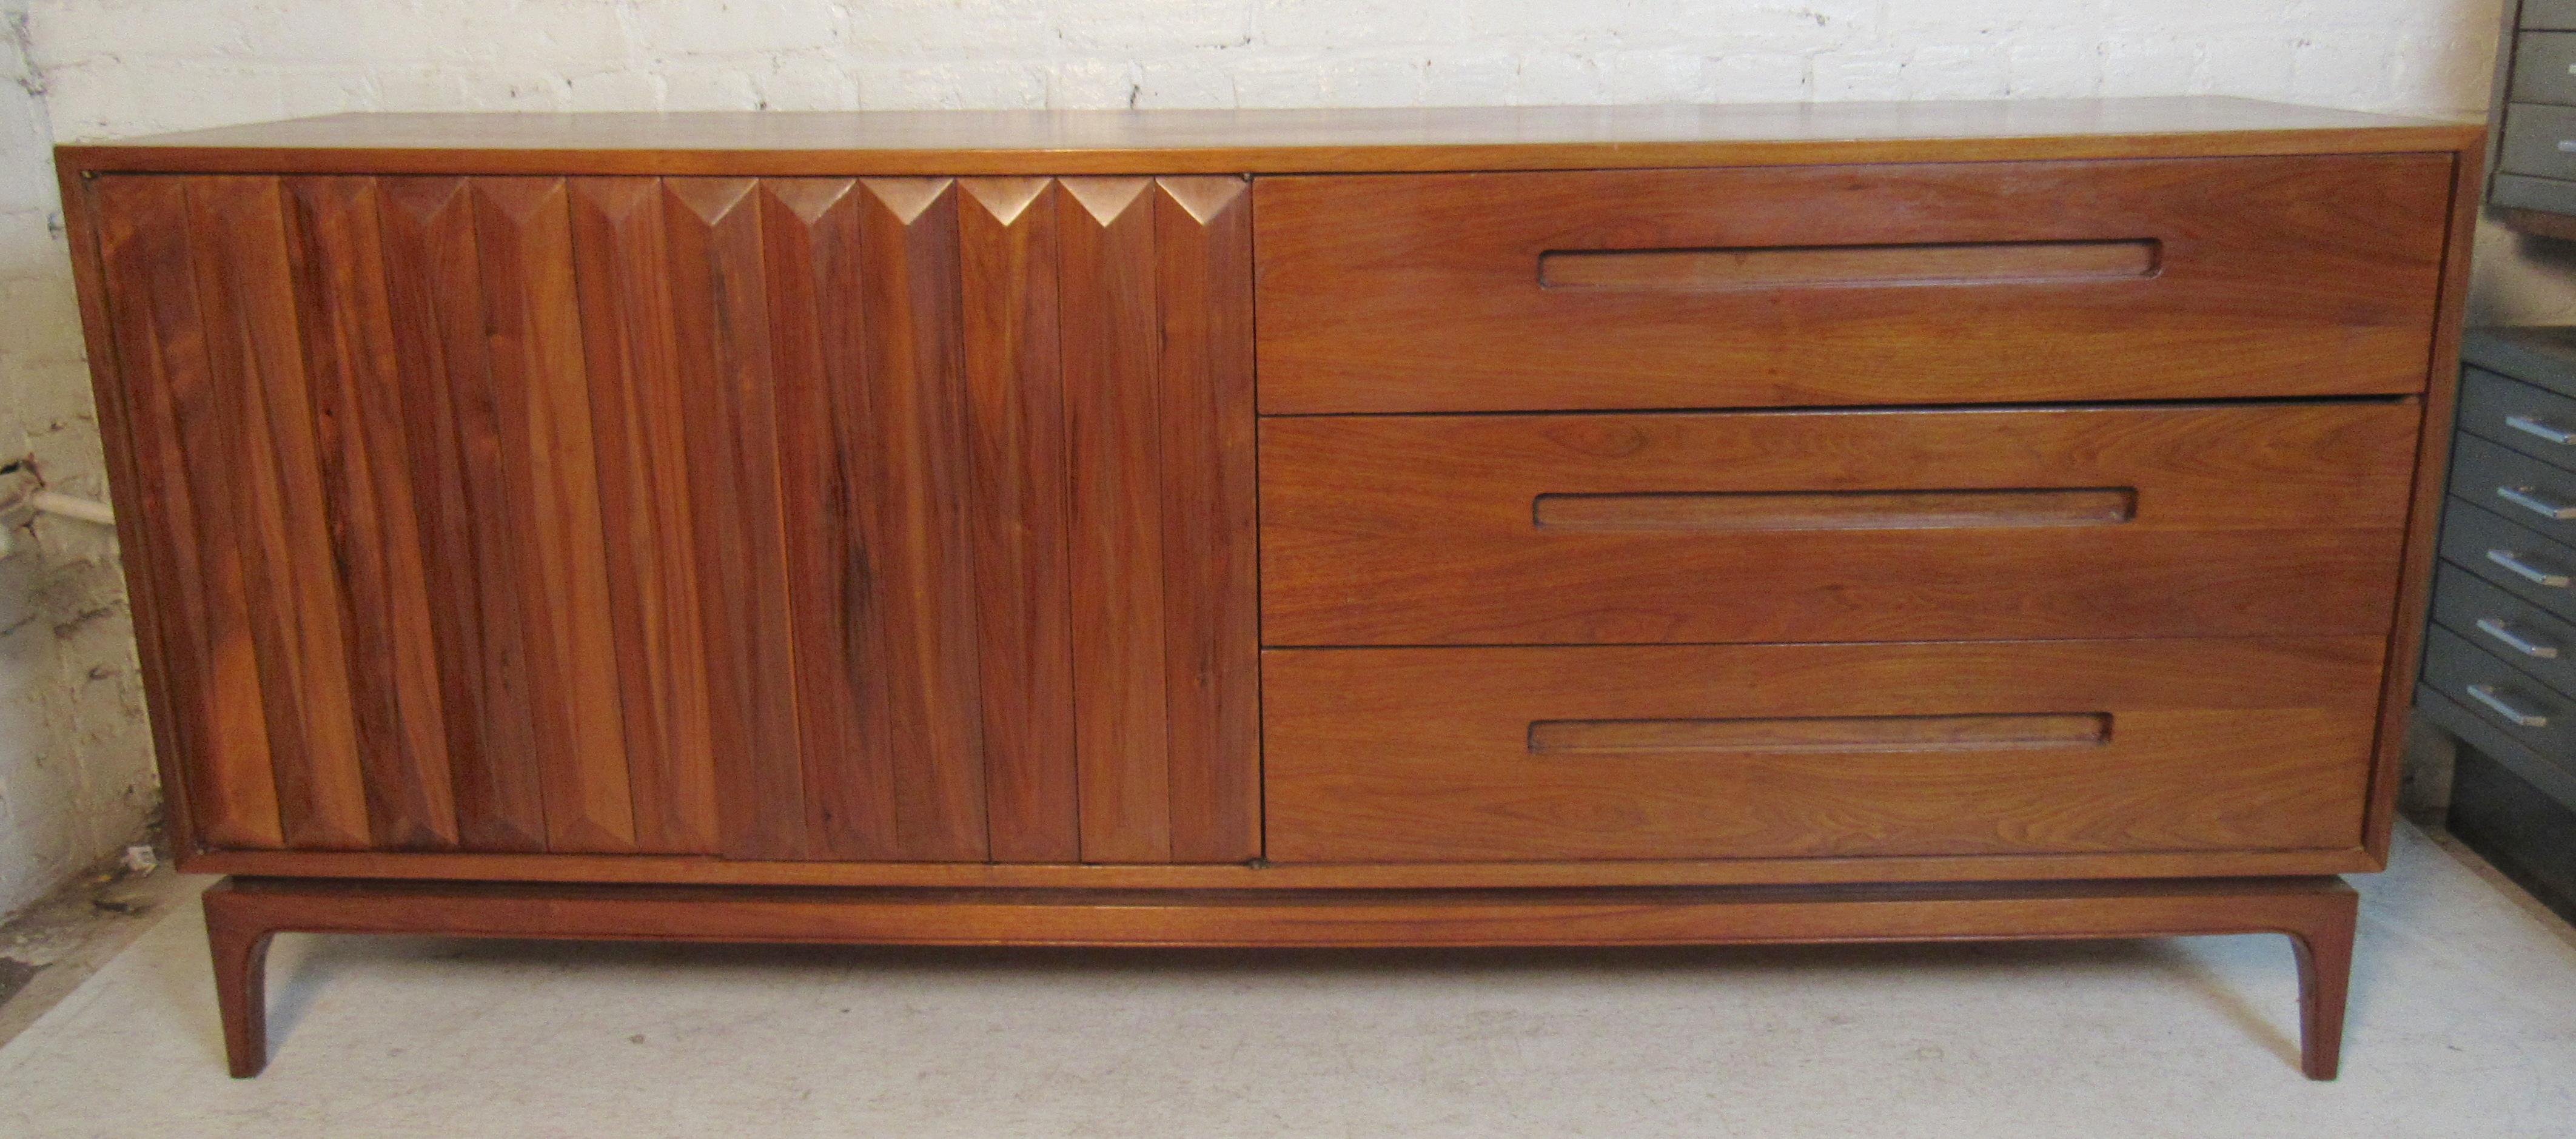 Long six drawer dresser with beautiful sculpted front doors. Warm walnut grain, inset handles and tapered legs.
(Please confirm item location - NY or NJ - with dealer).
 